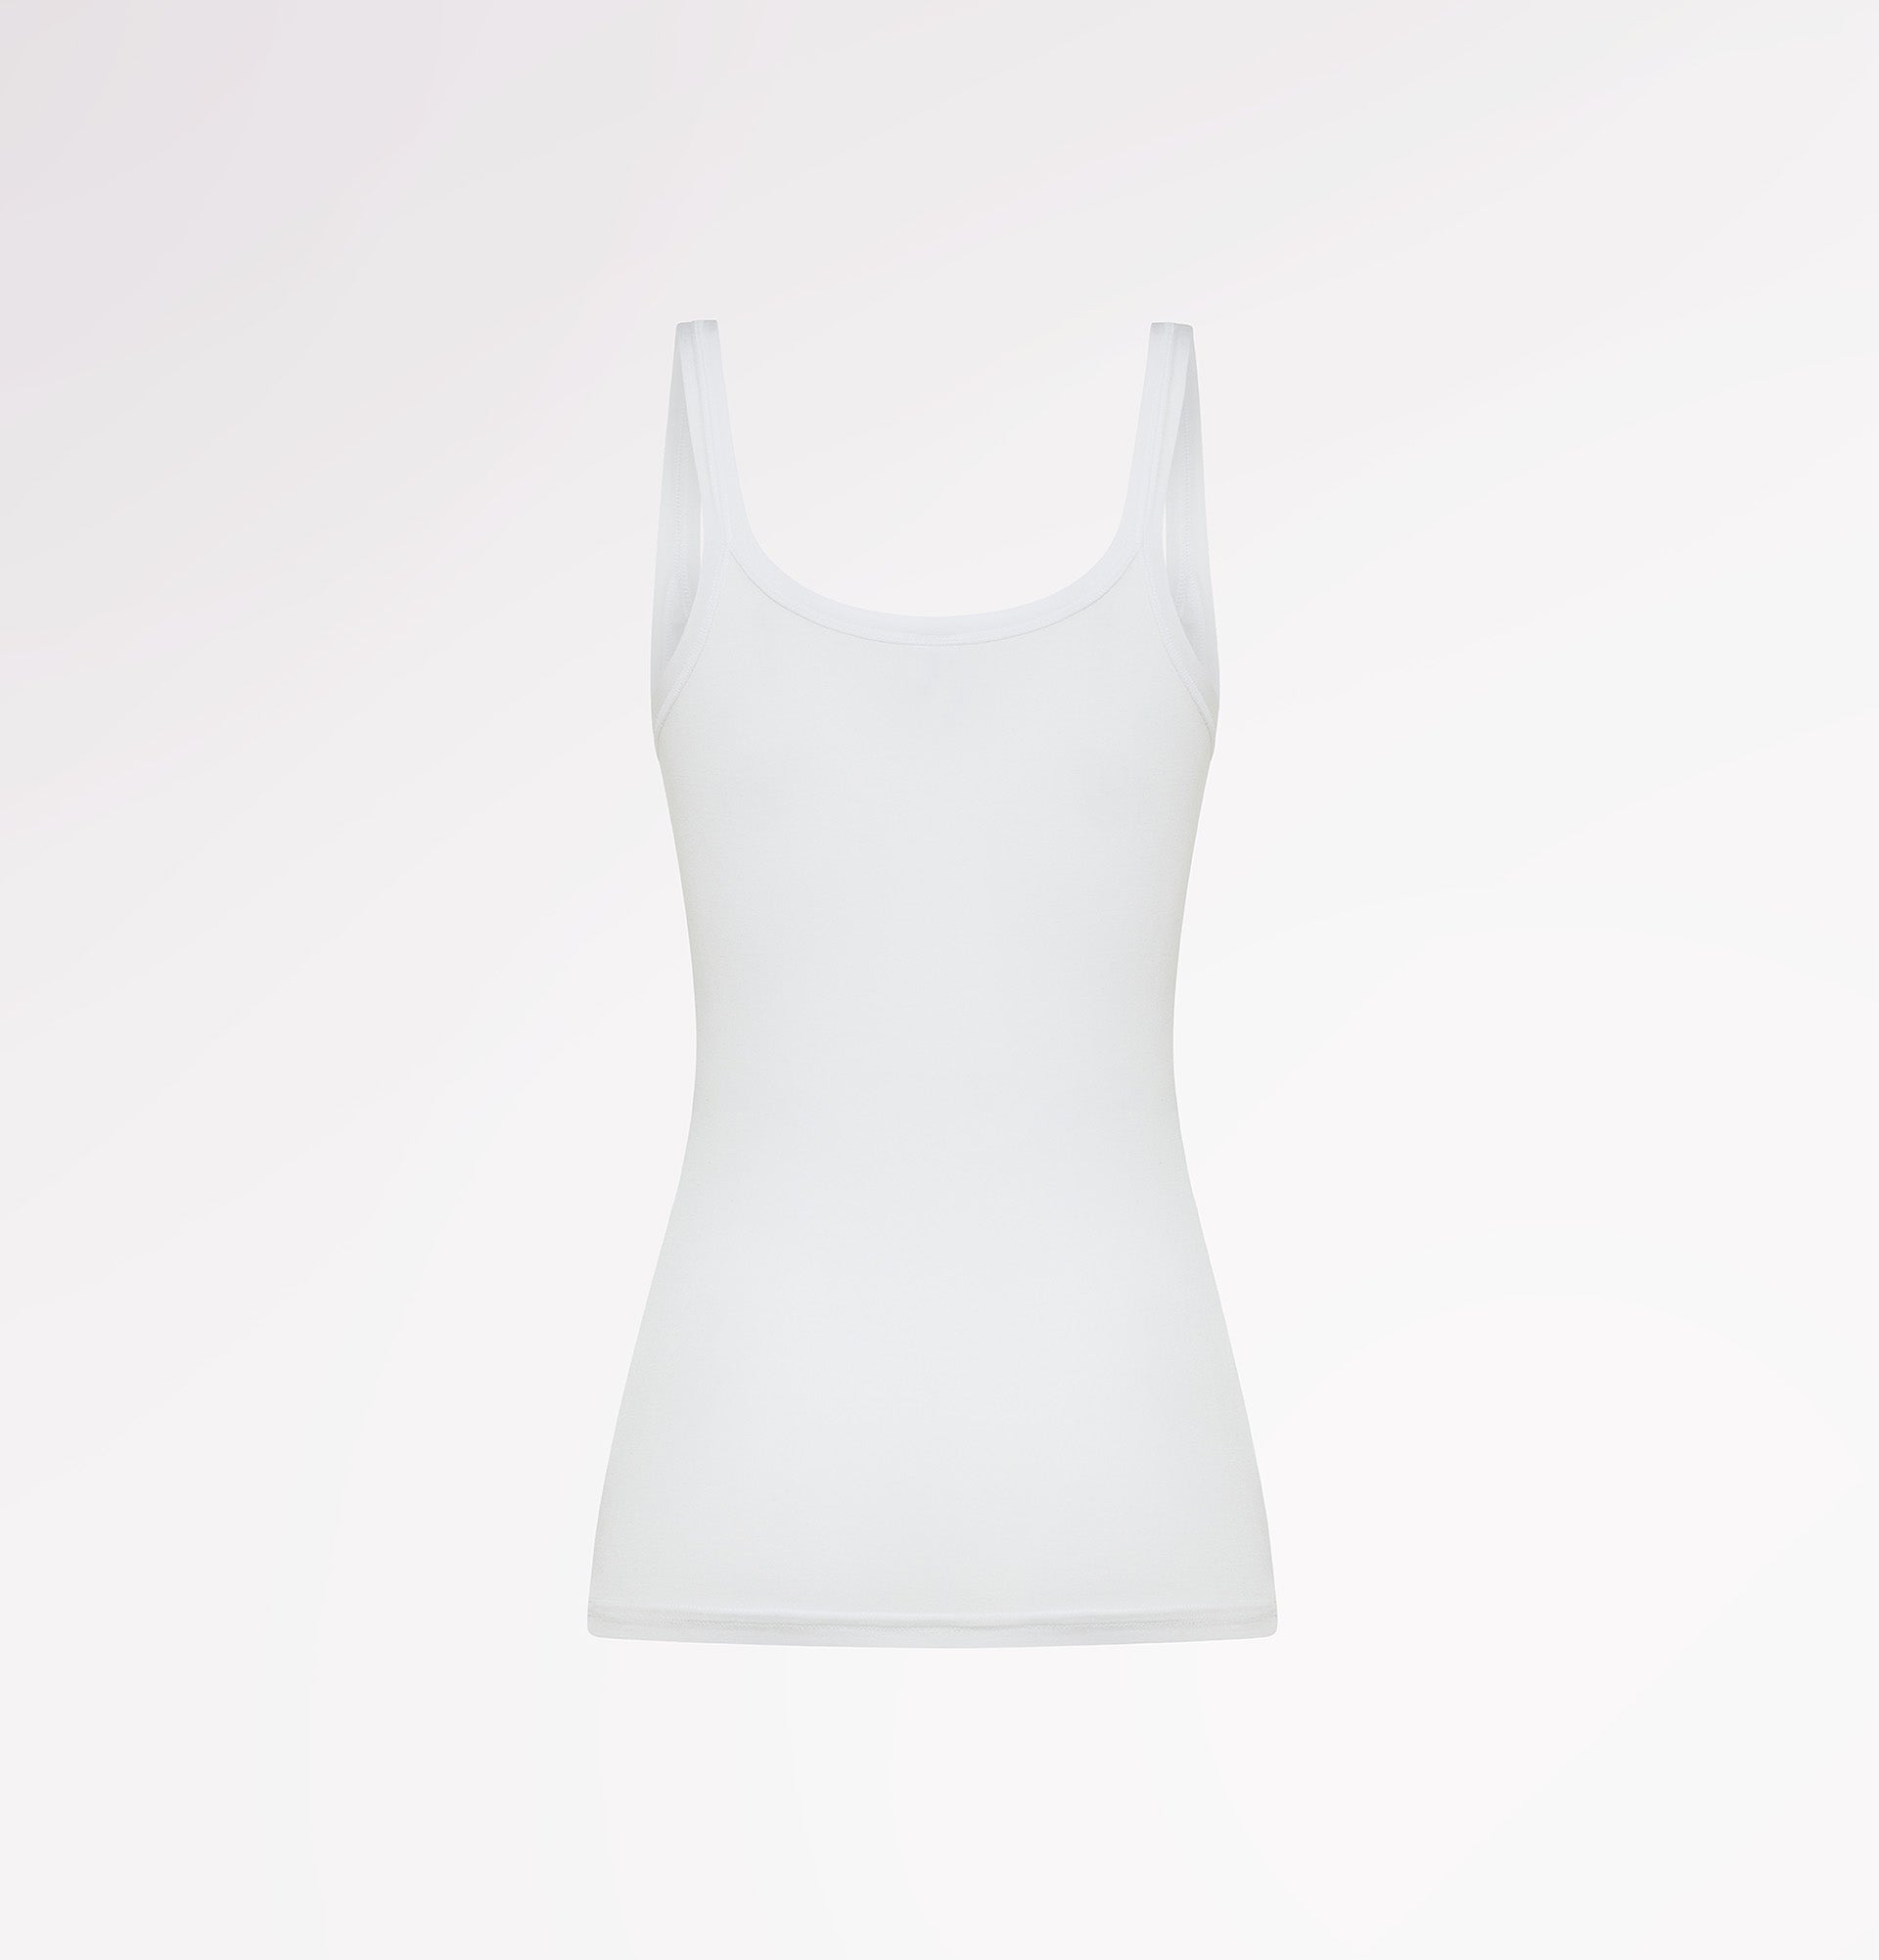 Classic tank top in natural fabric